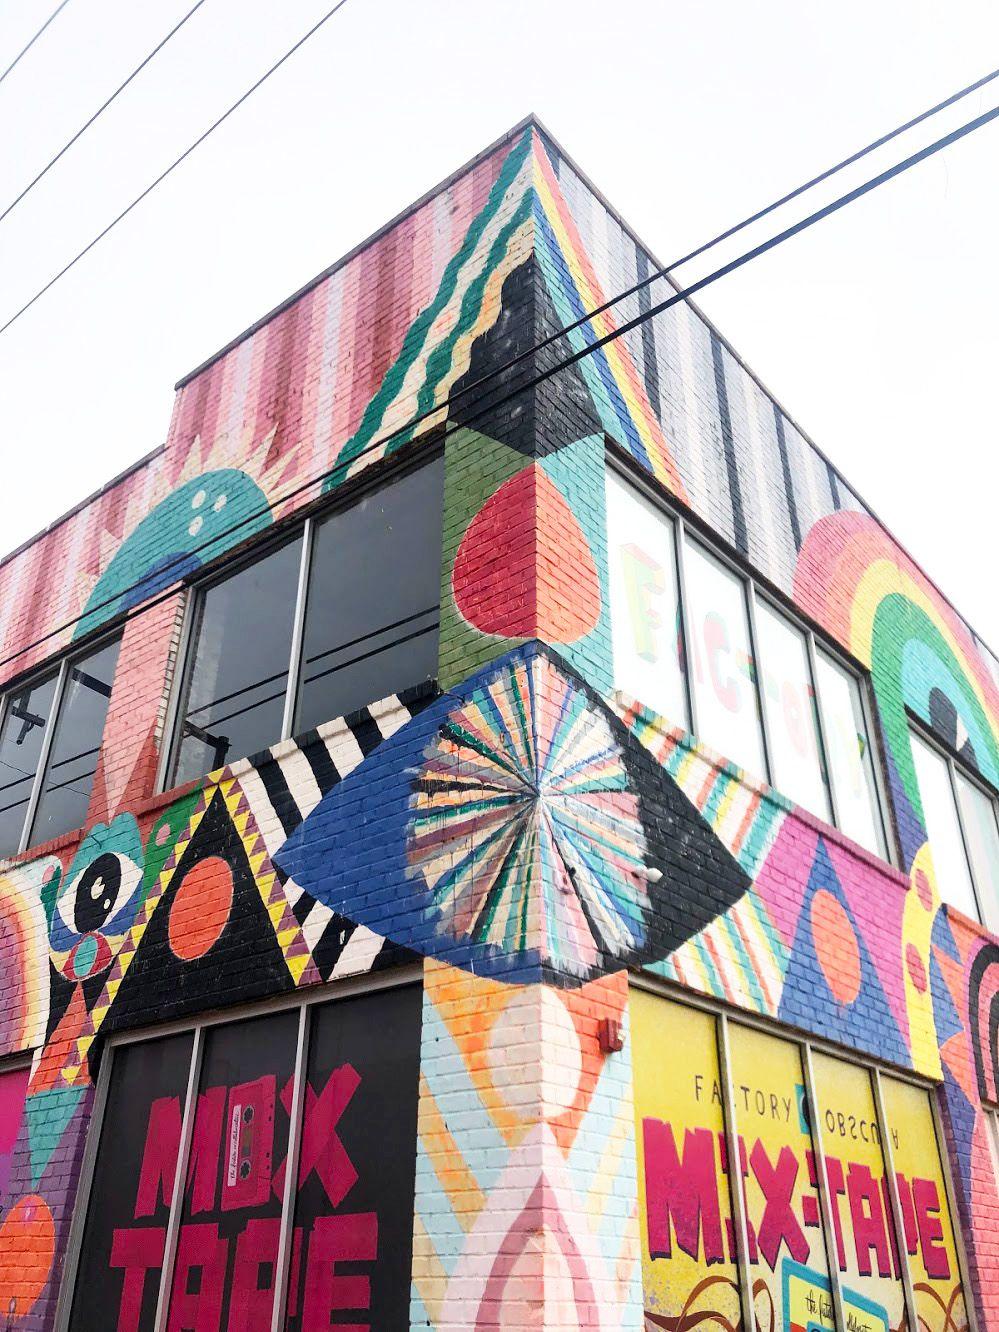 The colorful painted building of Factory Obscura in Oklahoma City.